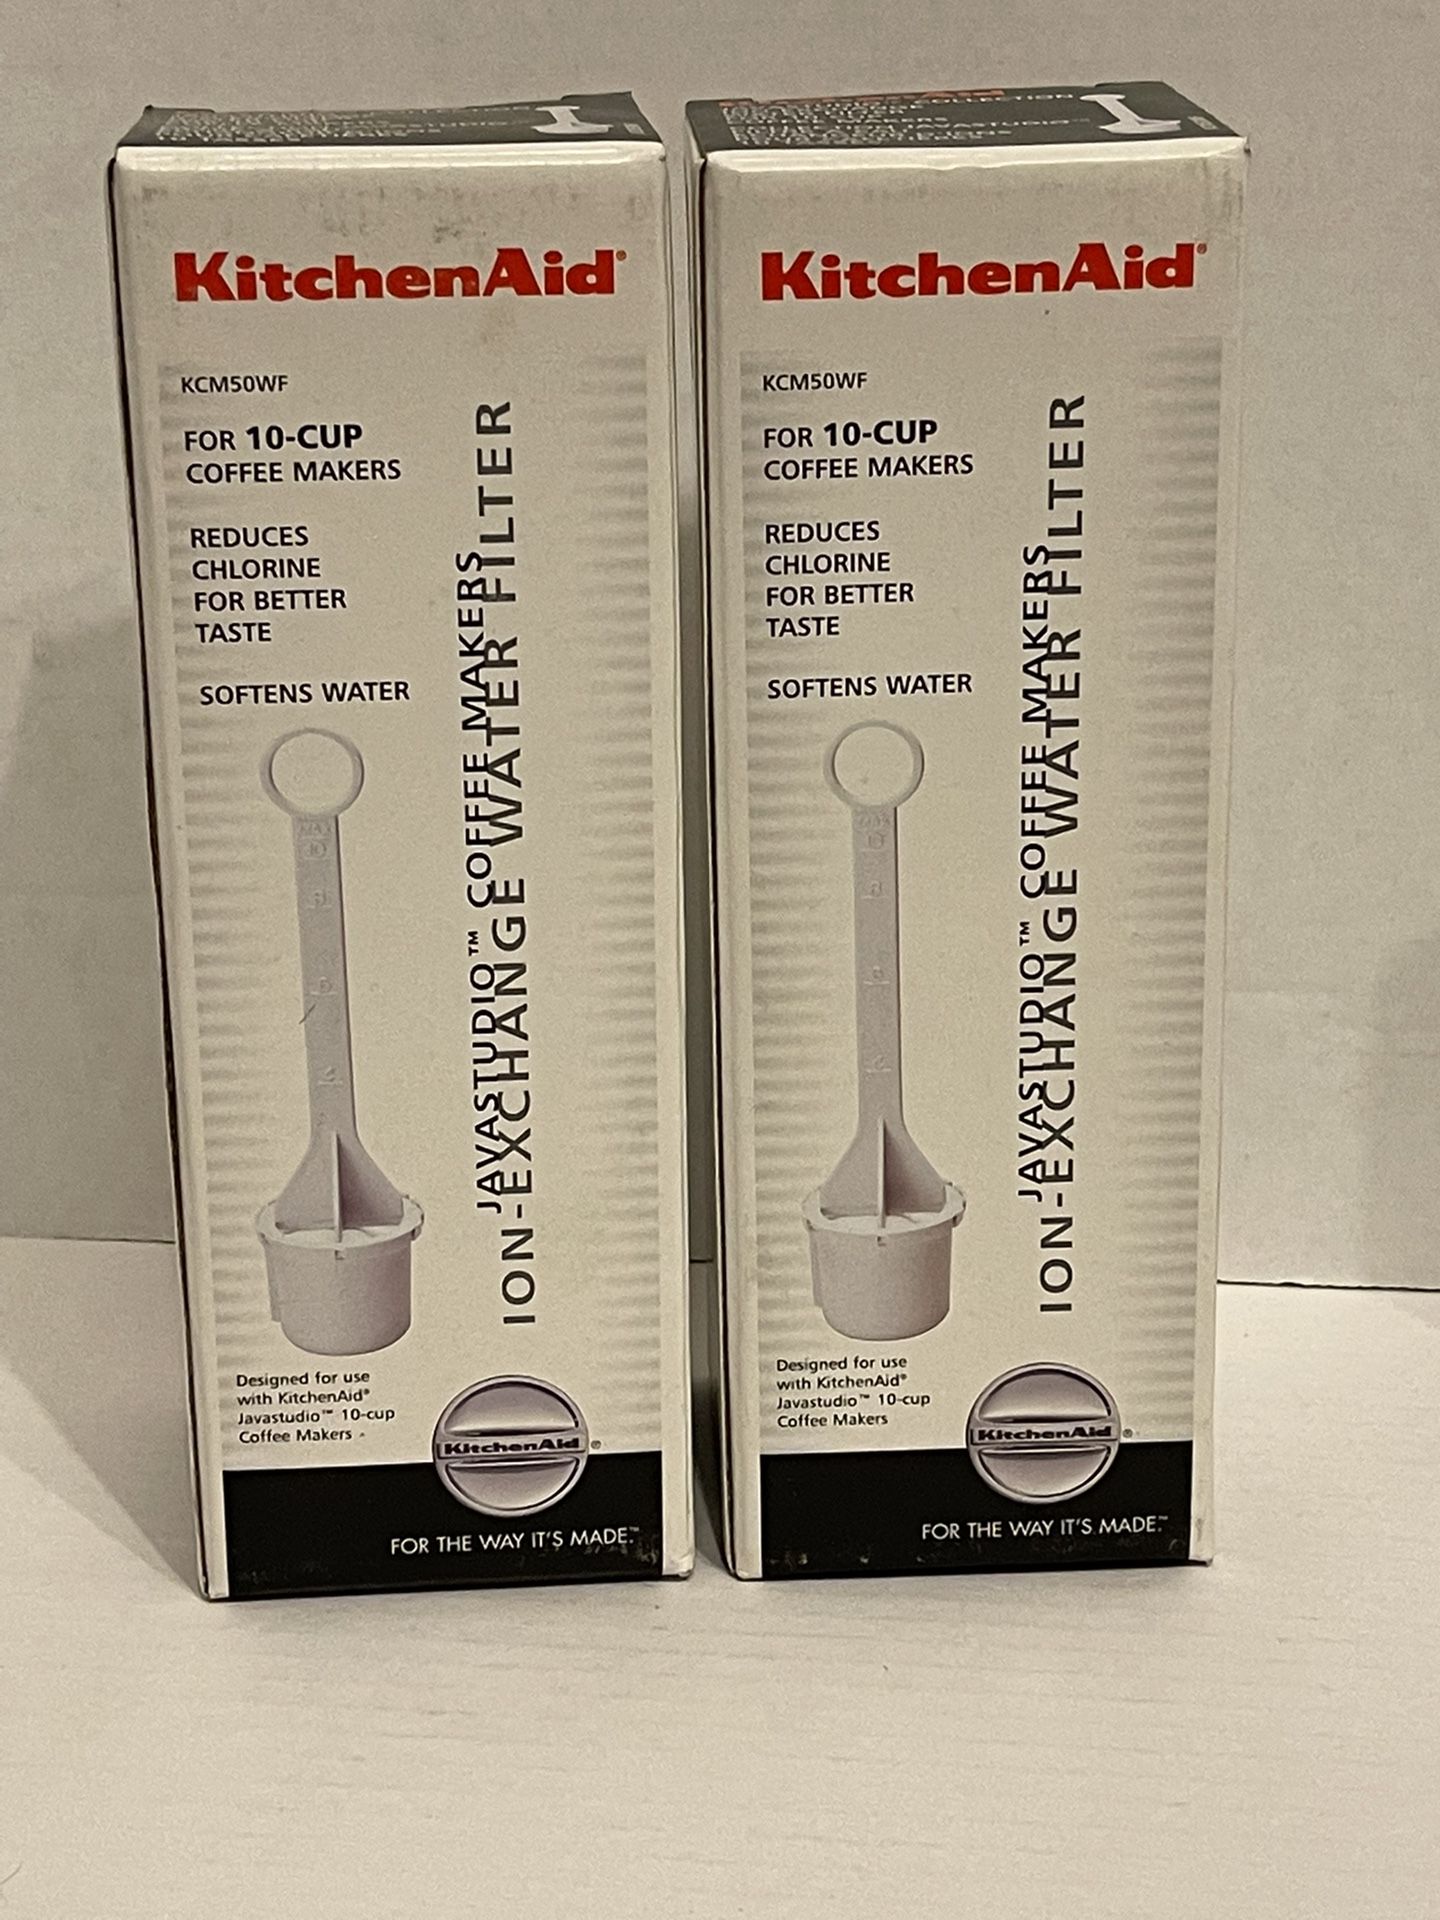 NEW 4 Kitchen Aid JavaStudio 10 cup coffee makers water filters 2 boxes x 2 per box